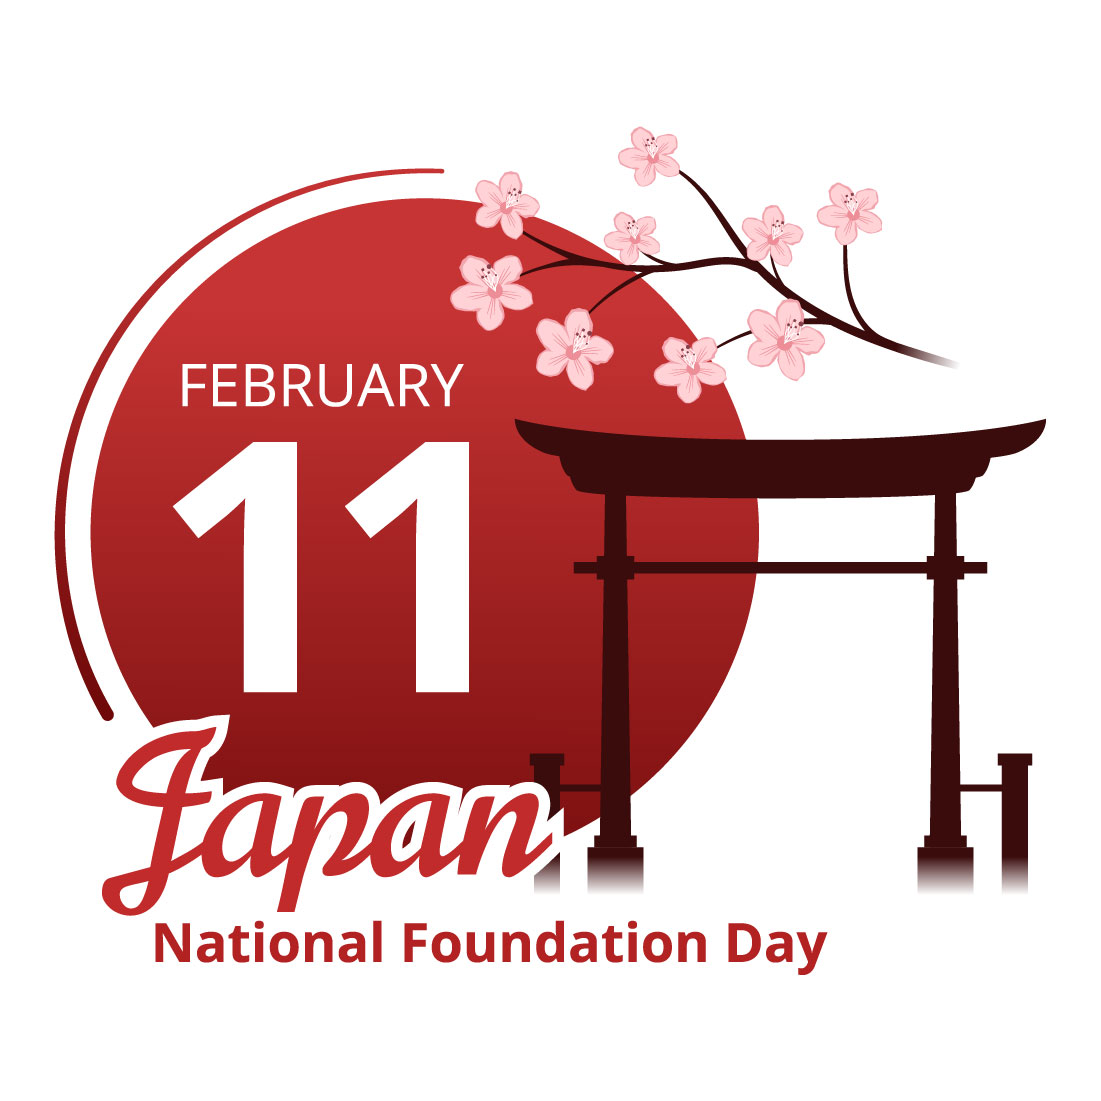 16 Japan National Foundation Day Illustration - main image preview.